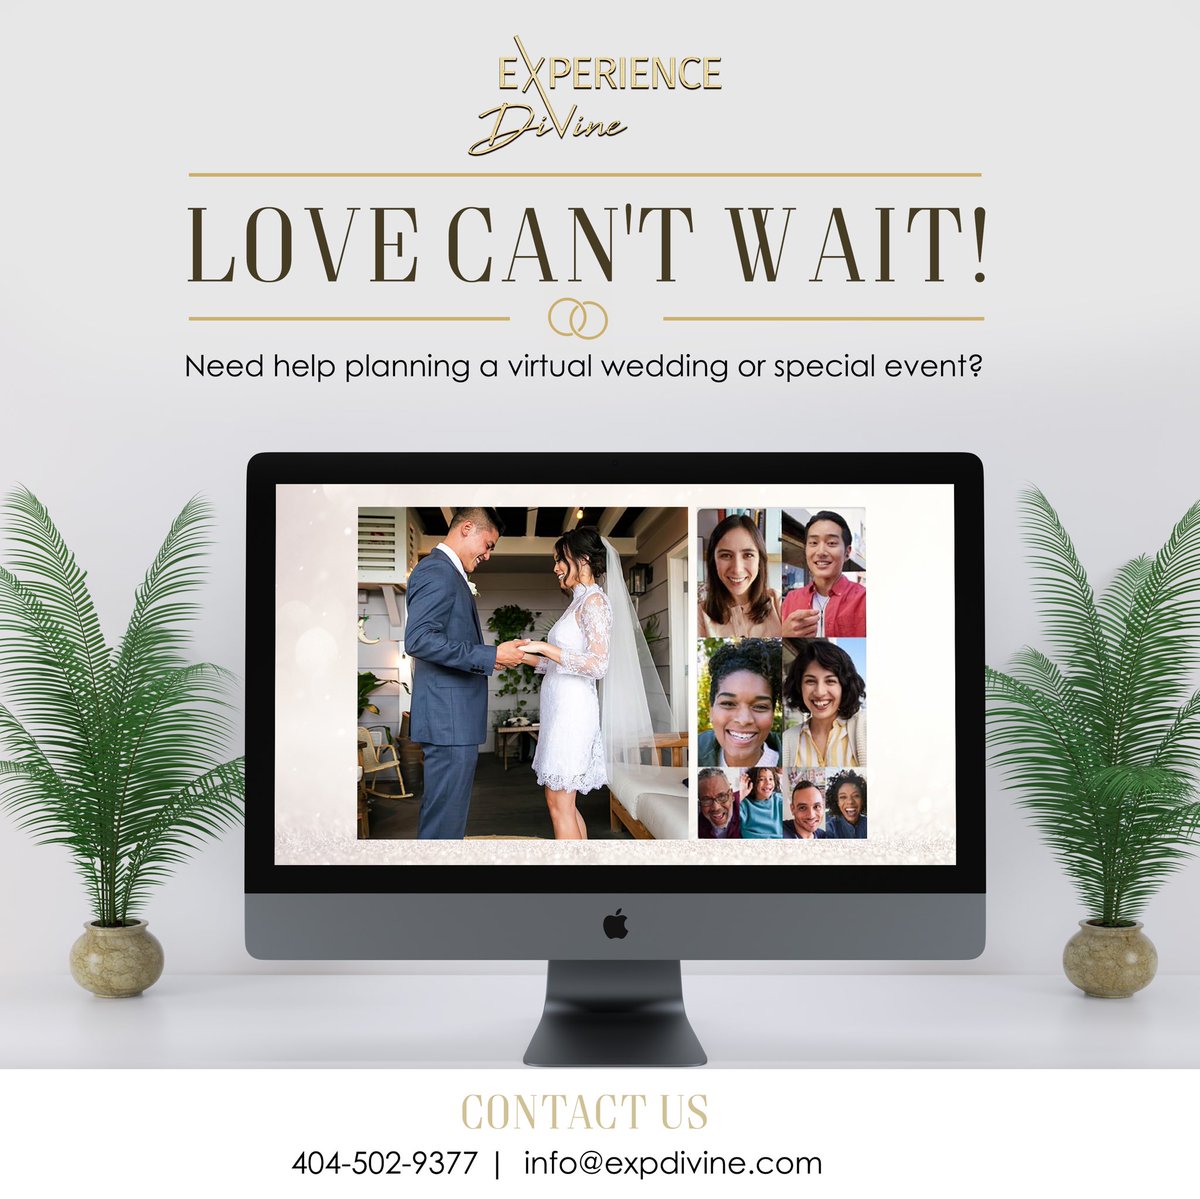 Rolling with the punches! #entepreneurlife #NewAd for @expdivine - Thanks @danielleqj18 @championdreams 

Wedding plans changing due to the pandemic? Have a virtual wedding/event!

We can help you organize, plan and decorate for your big day! Your wedding can still be beautiful!